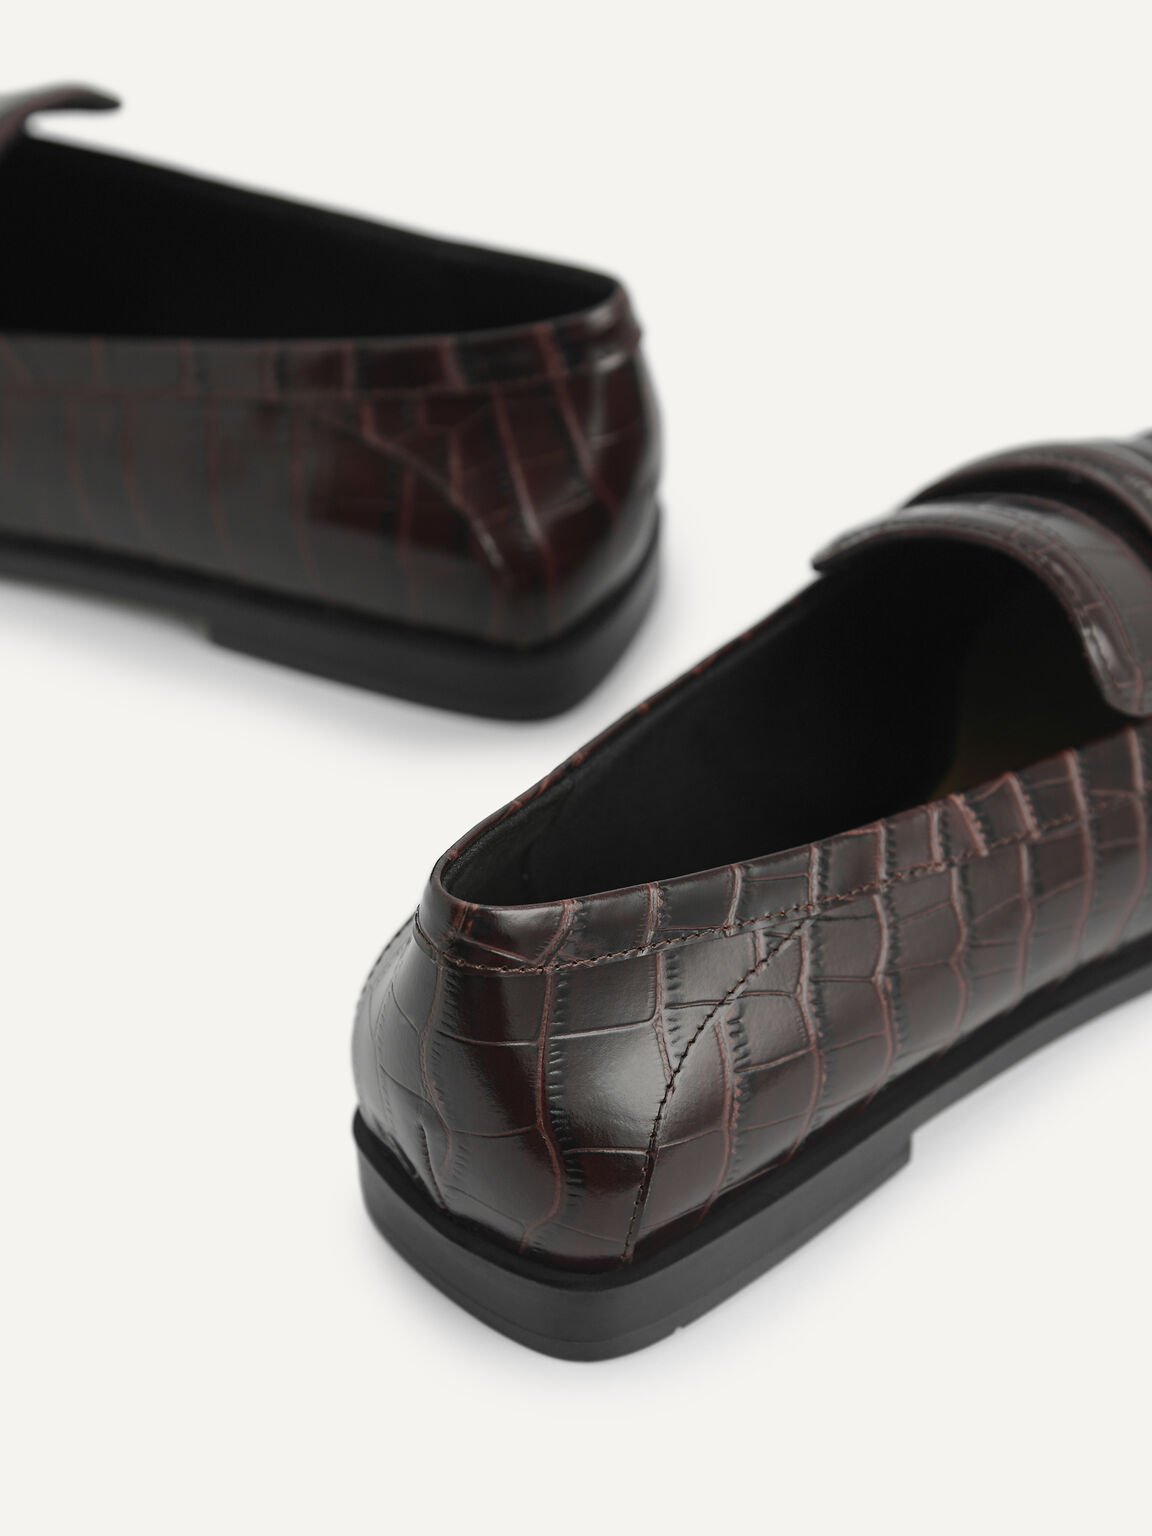 Croc-Effect Leather Loafers, Dark Brown, hi-res